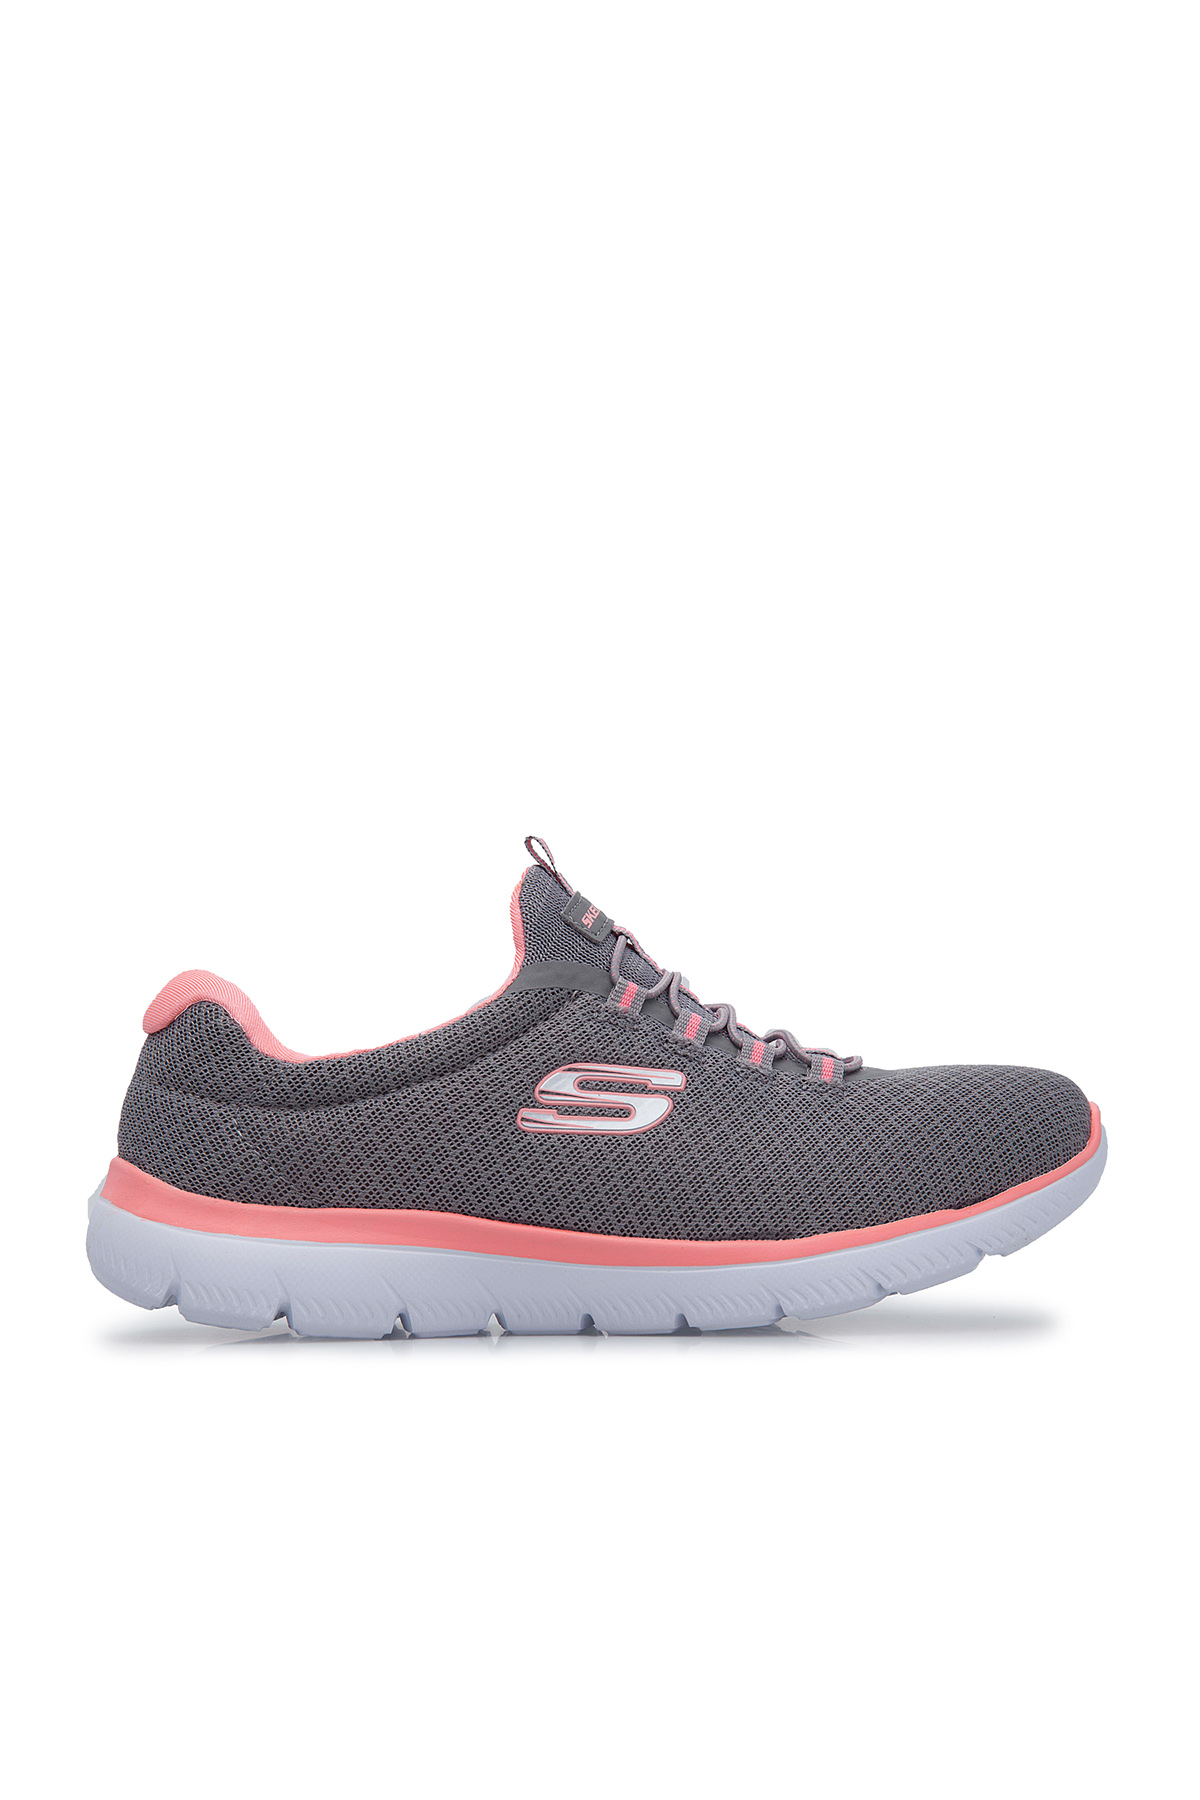 skechers official store